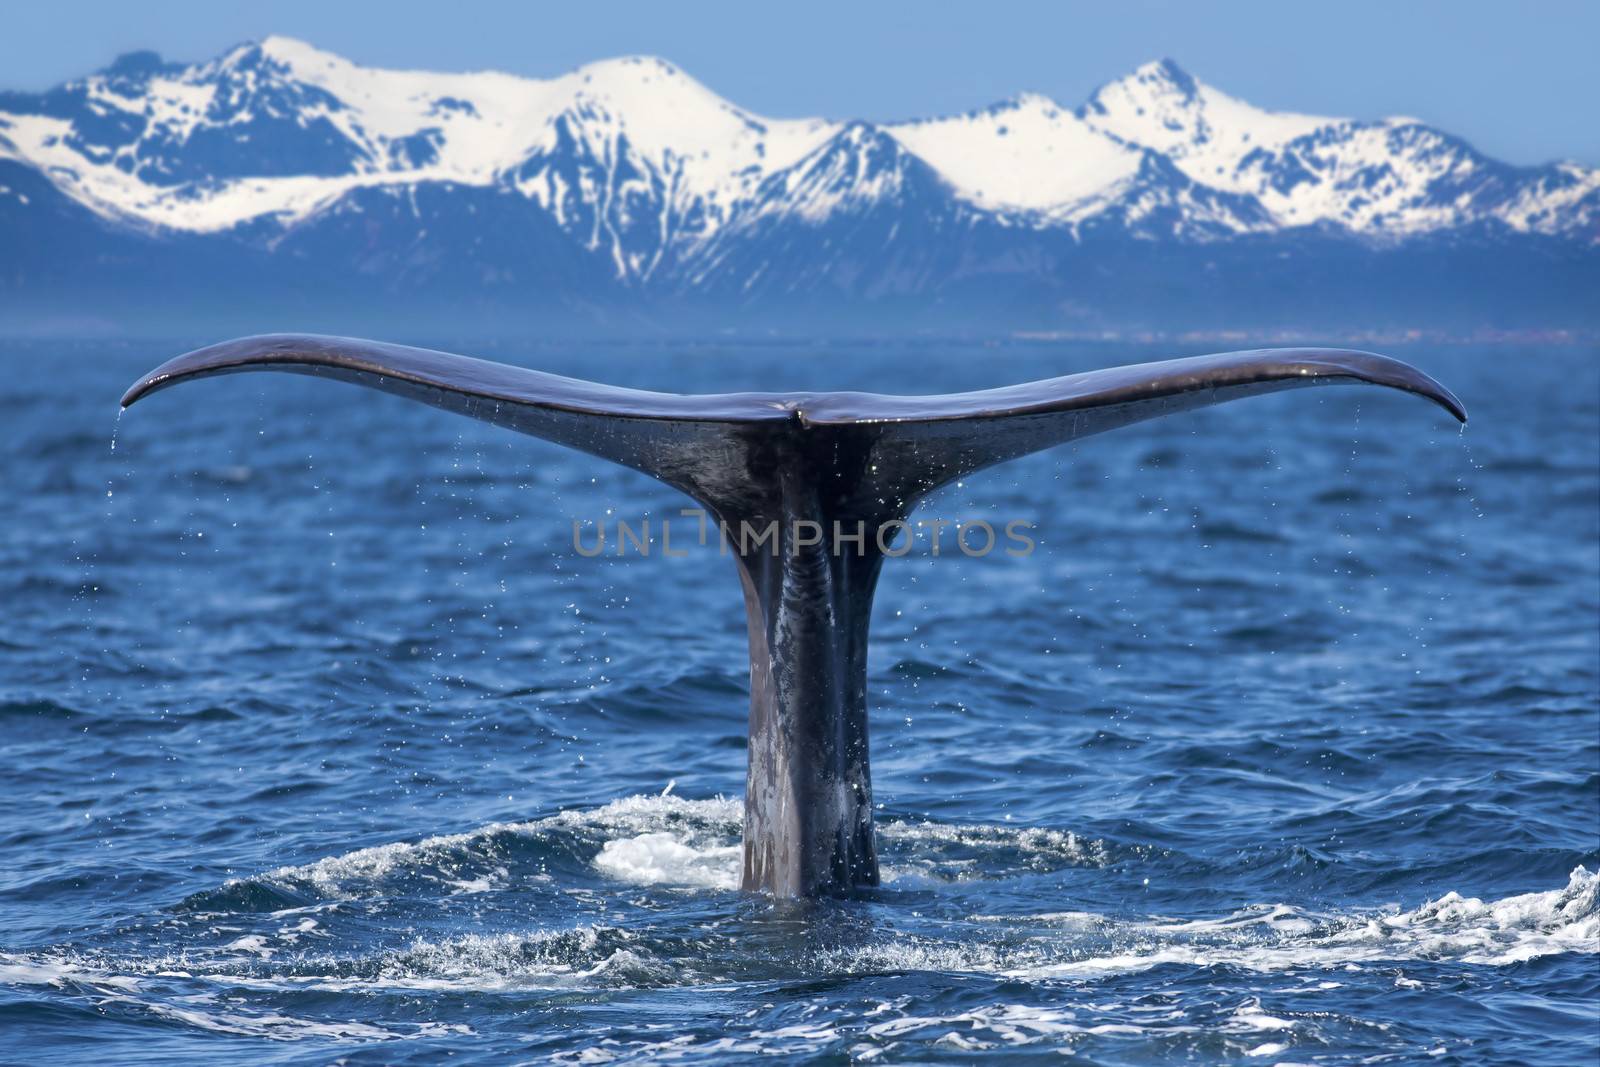 The tail of a Sperm Whale diving